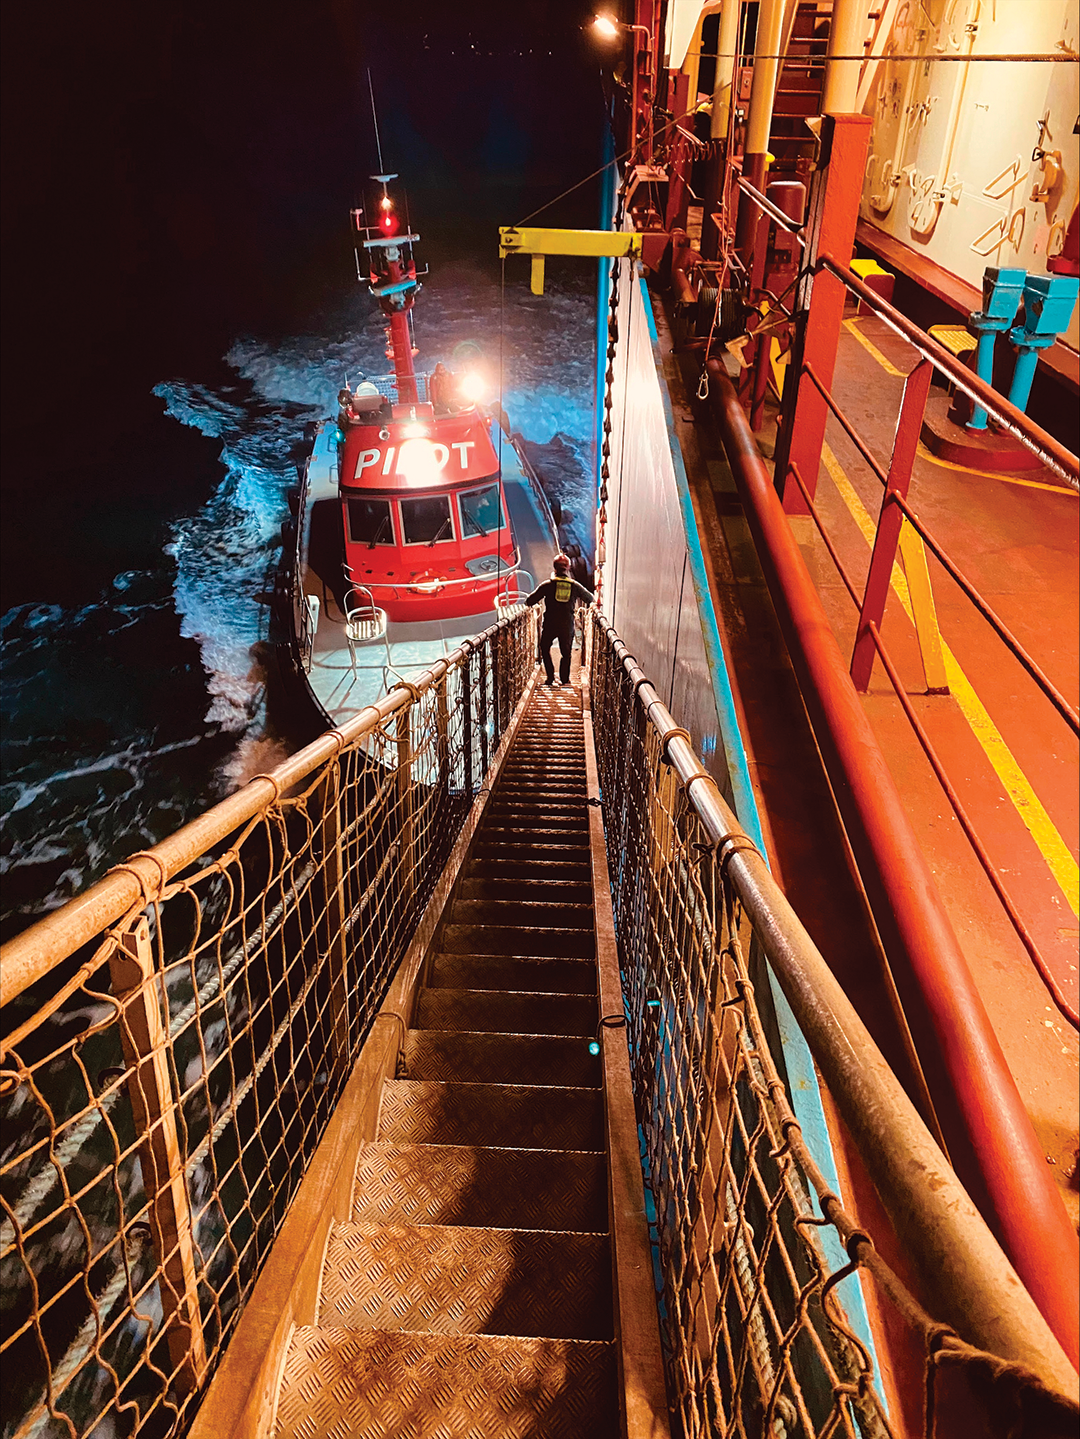 An early morning job done, a Puget Sound pilot descends an outbound ships accommodation ladder.